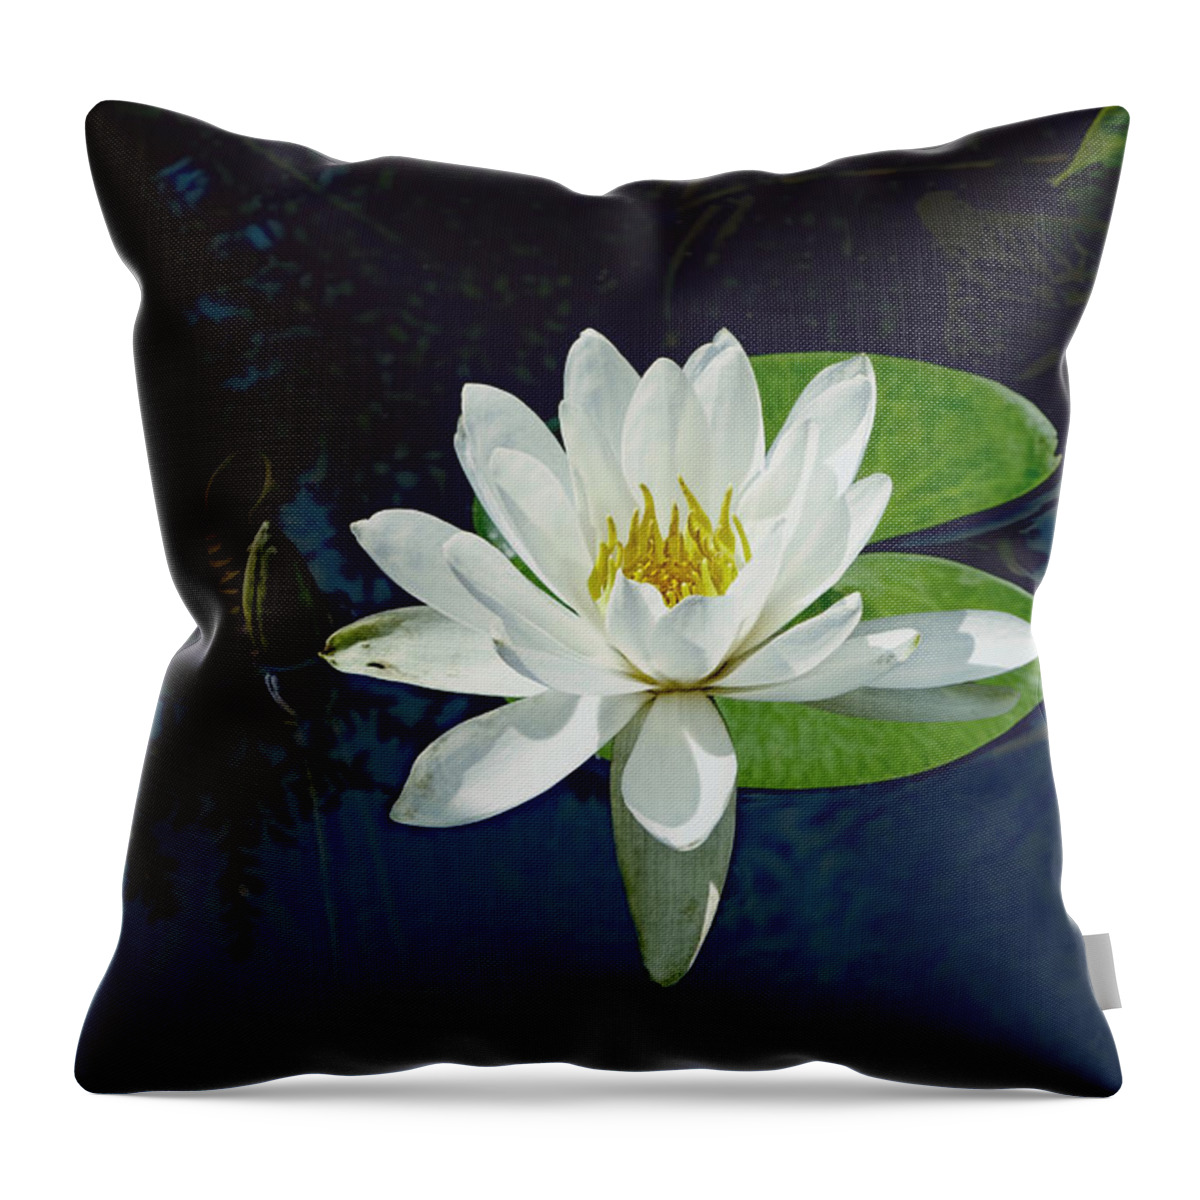 Lily Throw Pillow featuring the photograph White Water Lily by Ann Powell